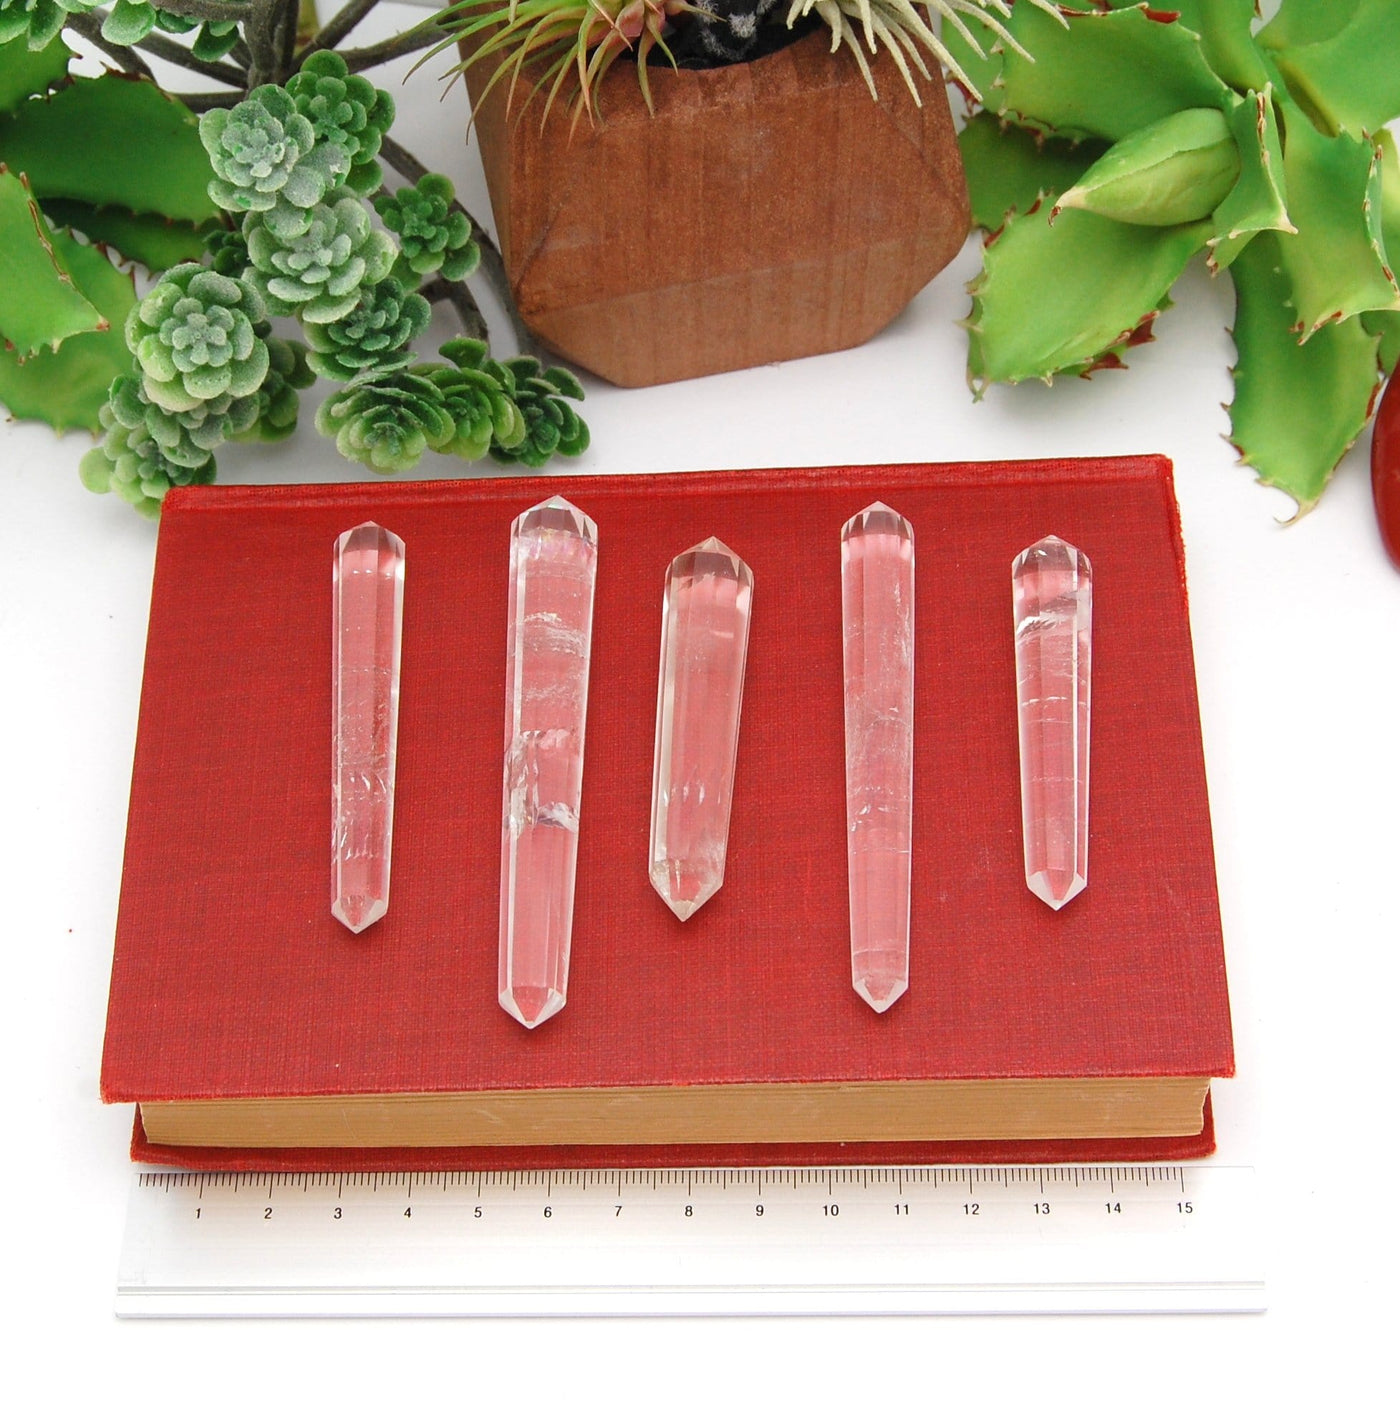 5 Double Terminated Crystal Quartz Points Different Size on Red Book Background.